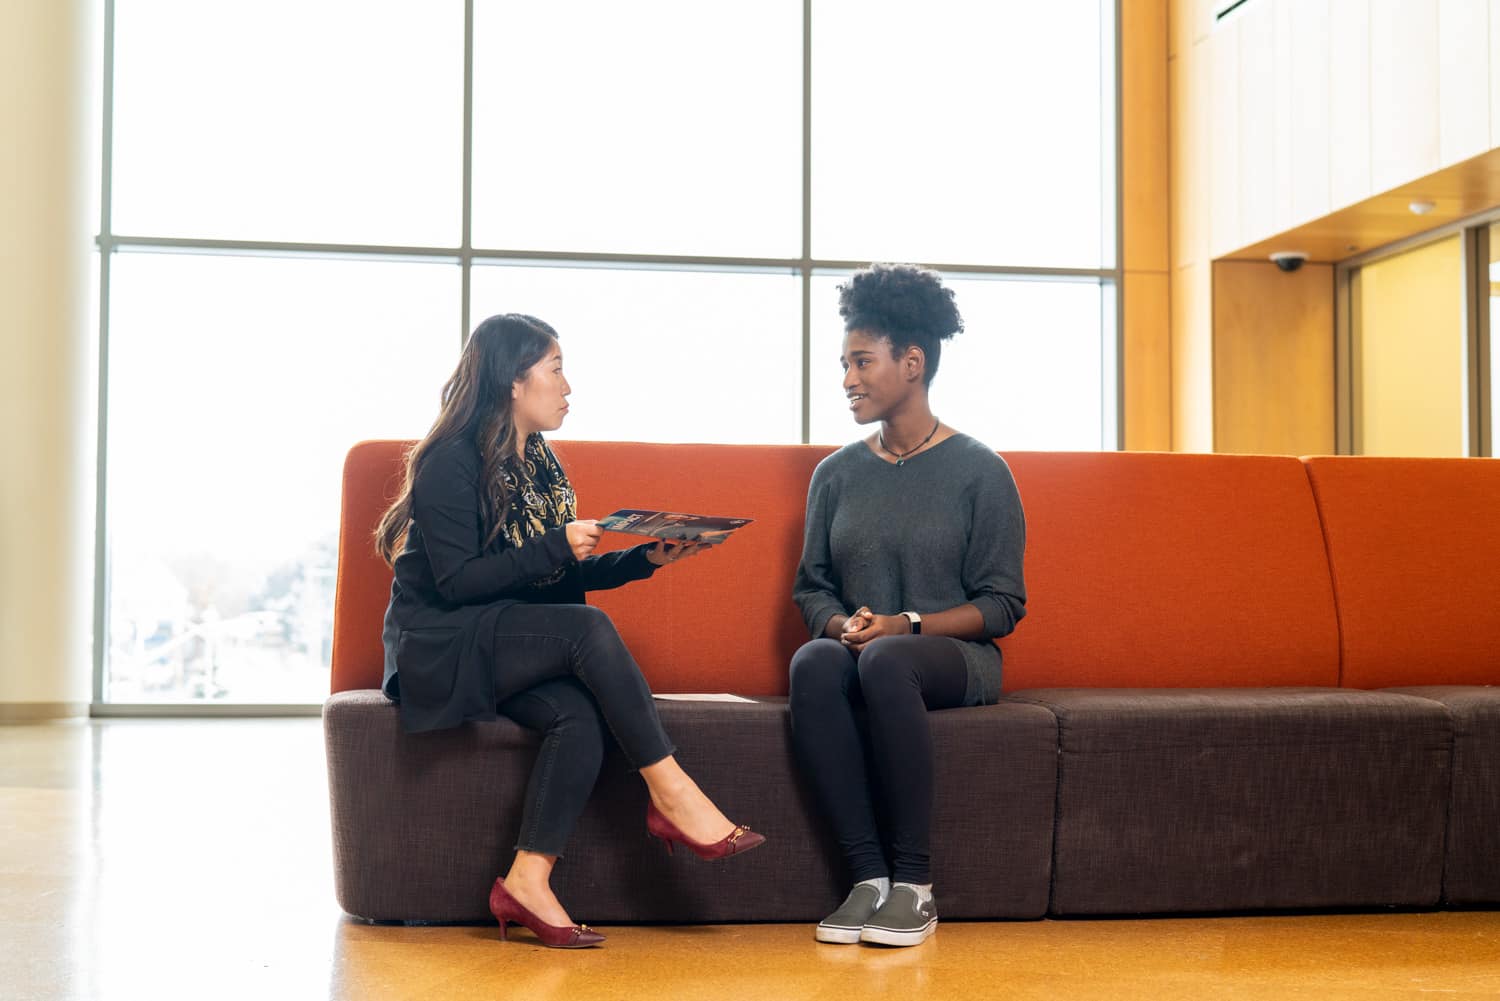  student and advisor discussing paperwork on couch 